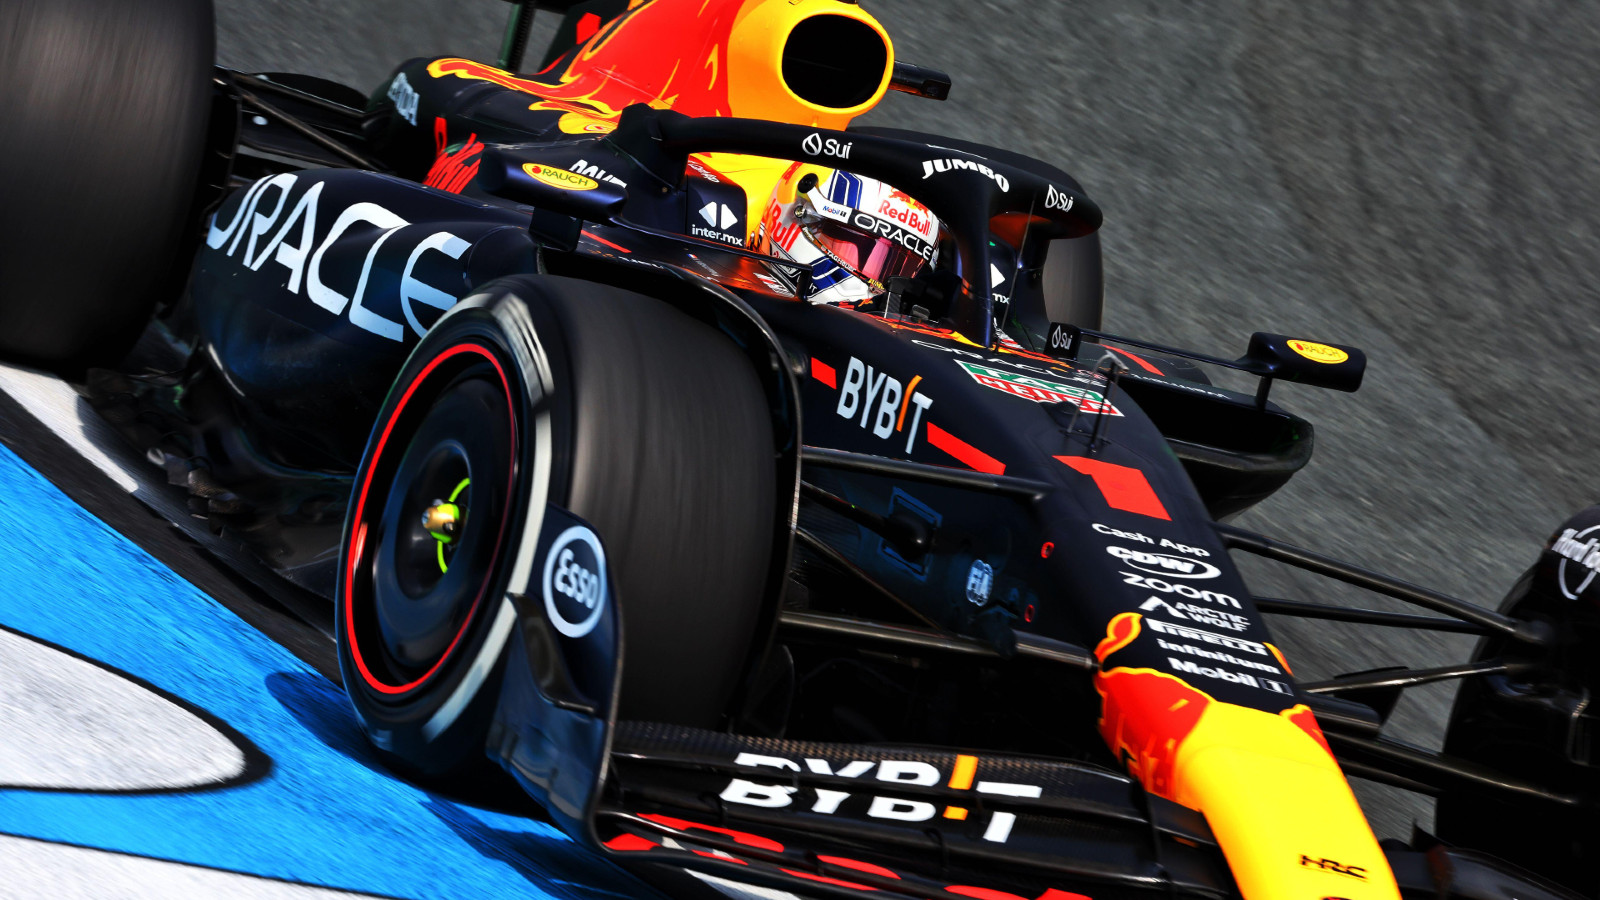 Max Verstappen, Red Bull driver, on track at Zandvoort for practice at the Dutch Grand Prix.